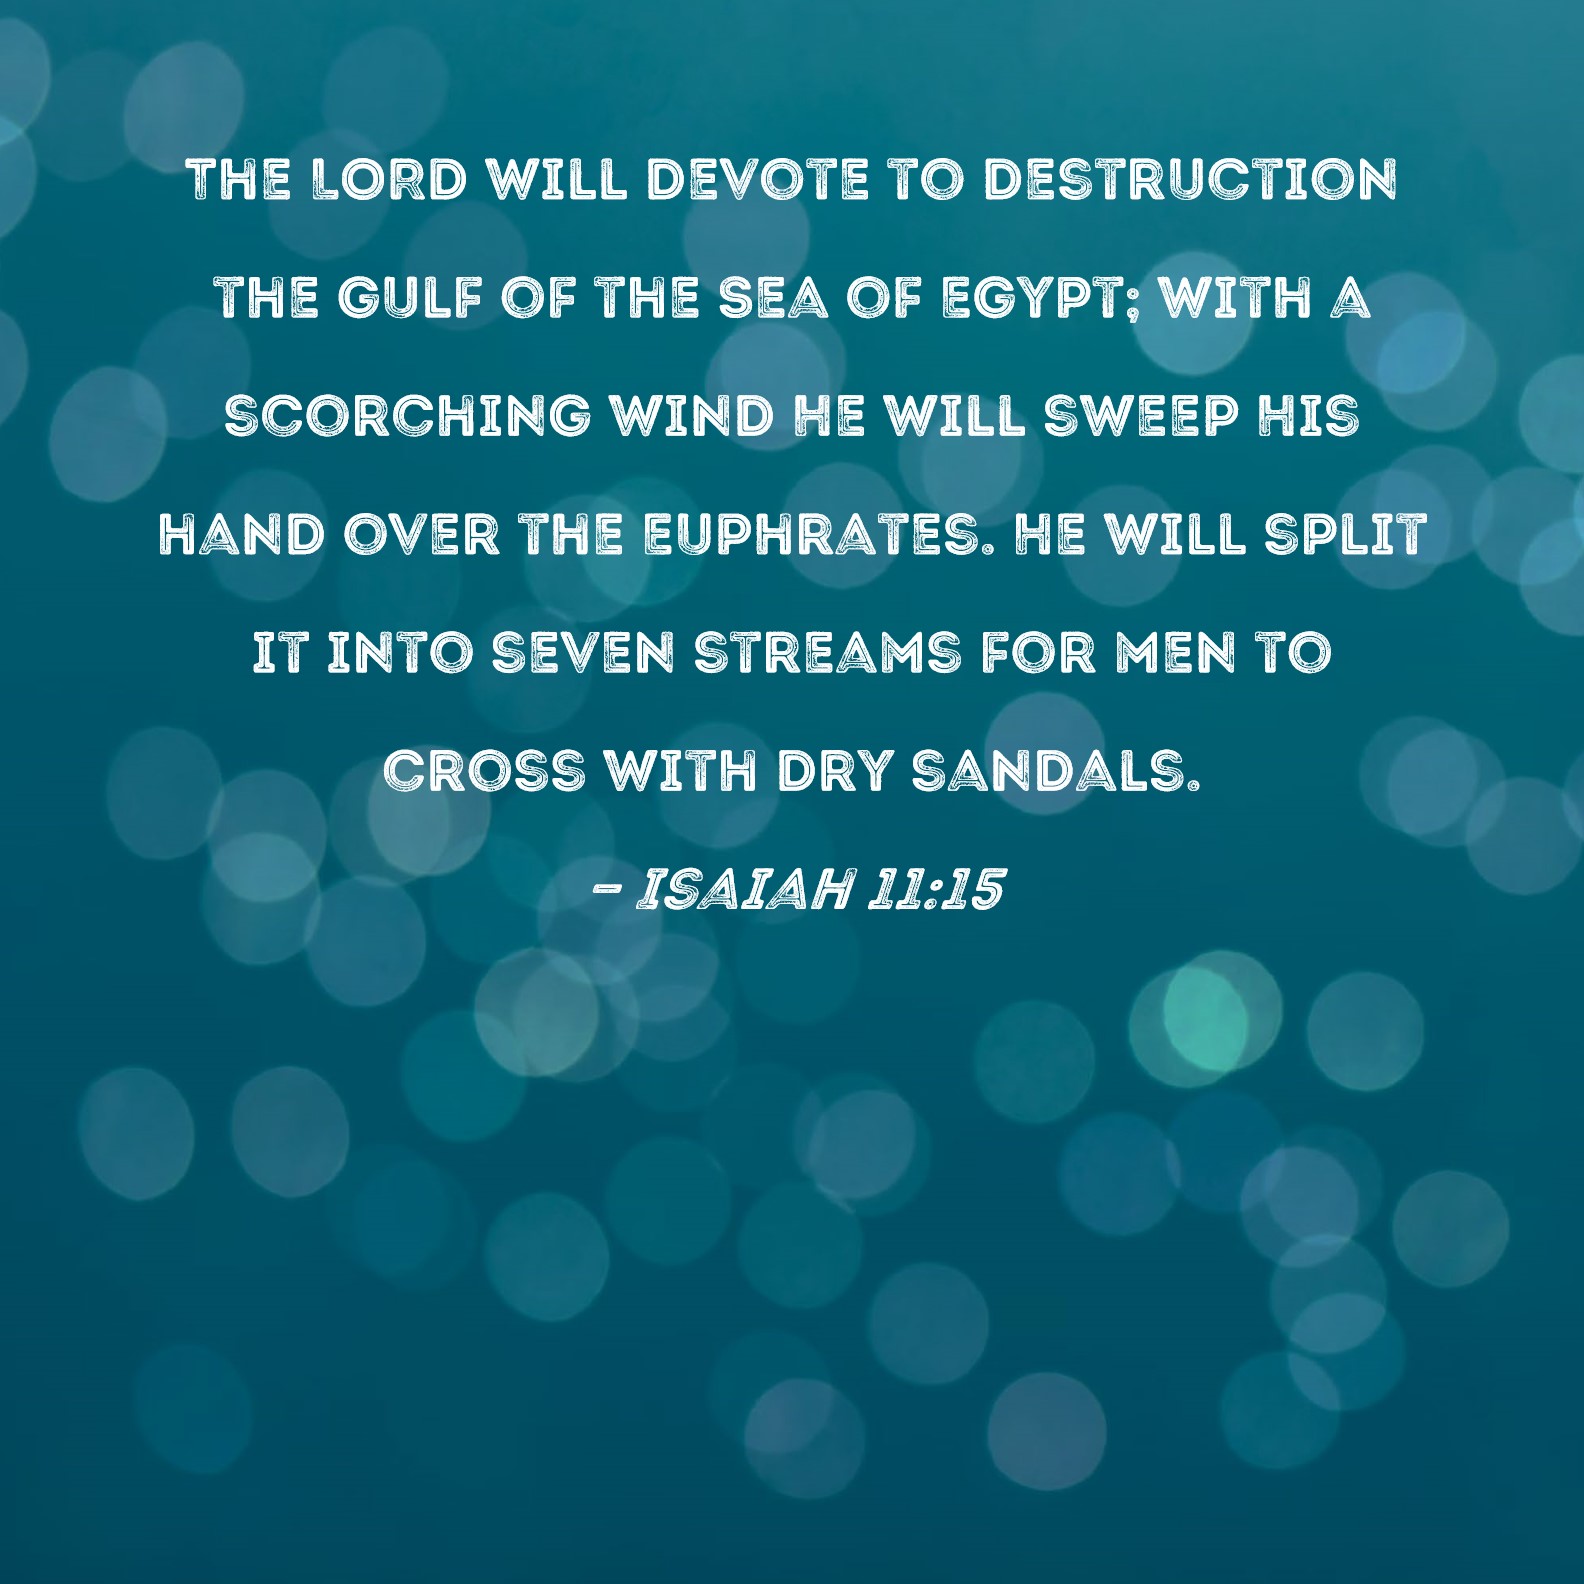 isaiah-11-15-the-lord-will-devote-to-destruction-the-gulf-of-the-sea-of